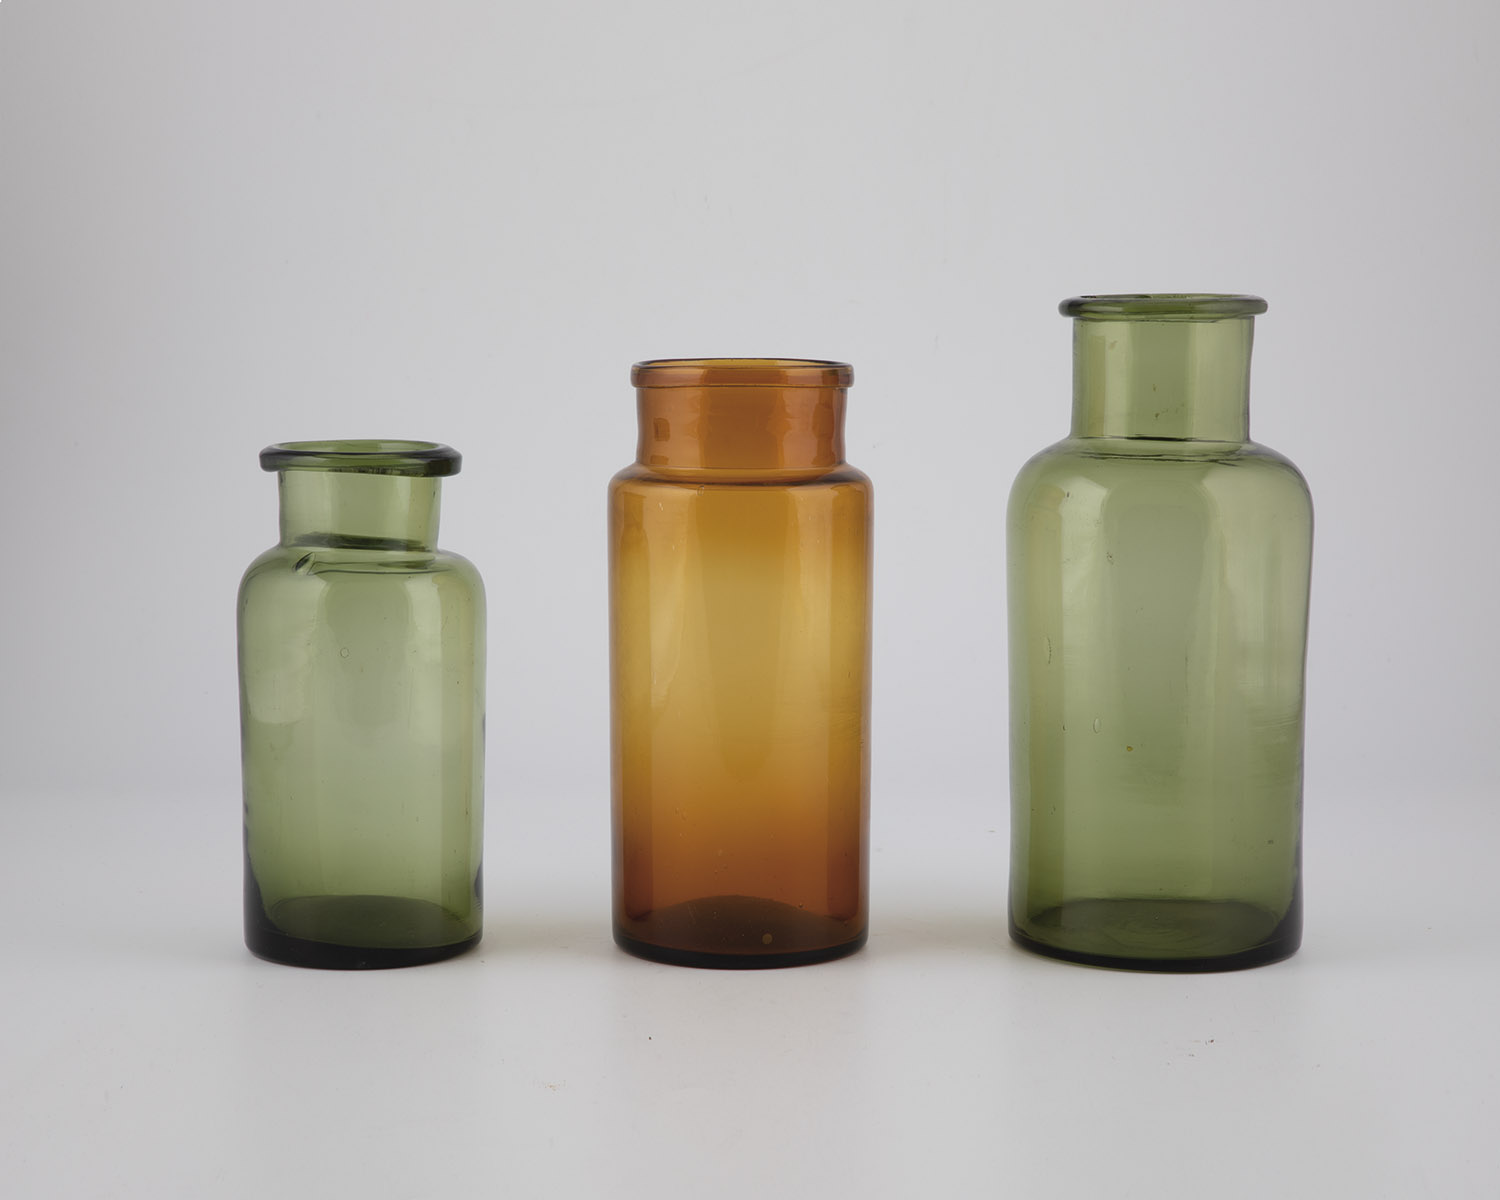 Three storage vessels, including northern Germany, 19th century, green and brown glass.